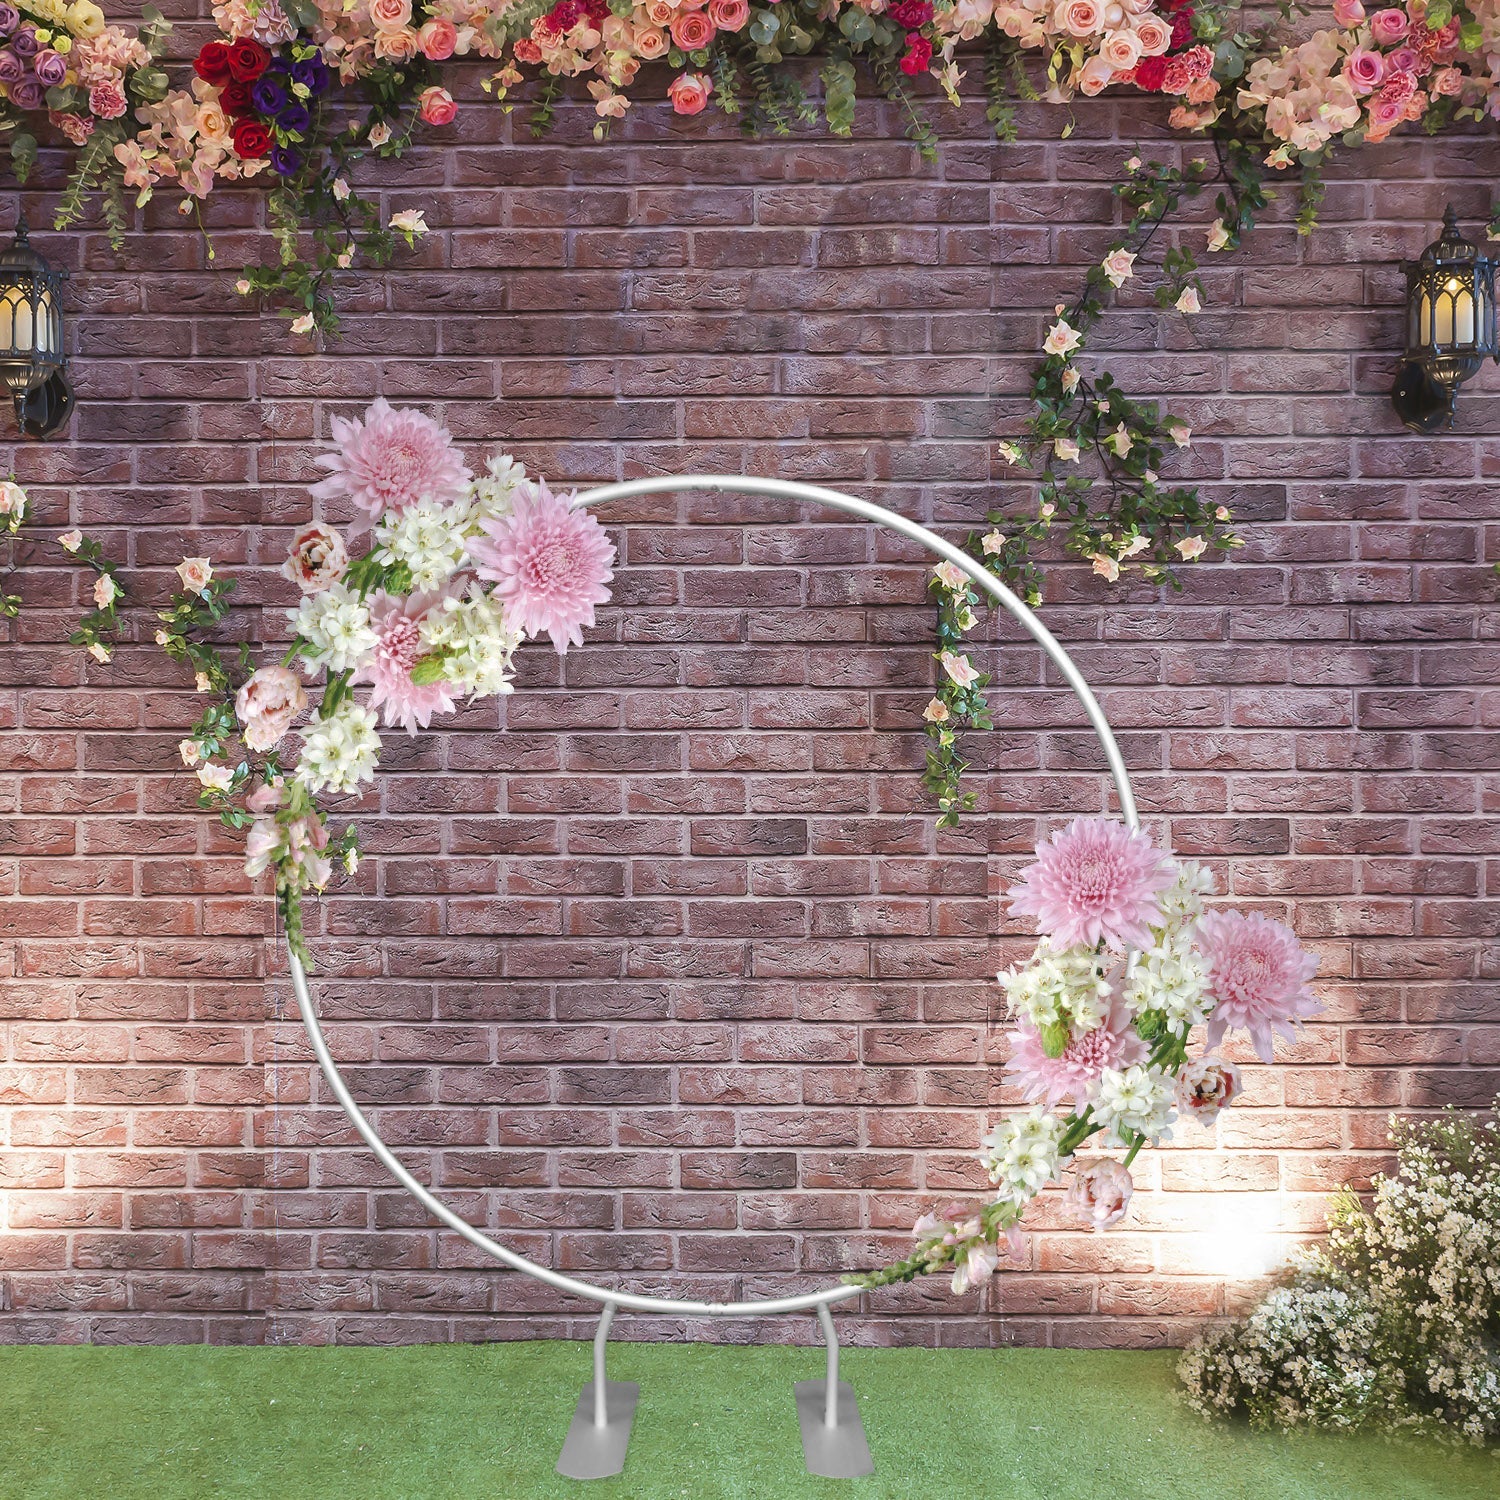 Circular Backdrop Stand ( Diameter 79 inches ) for Wedding & Birthday Parties Decorations